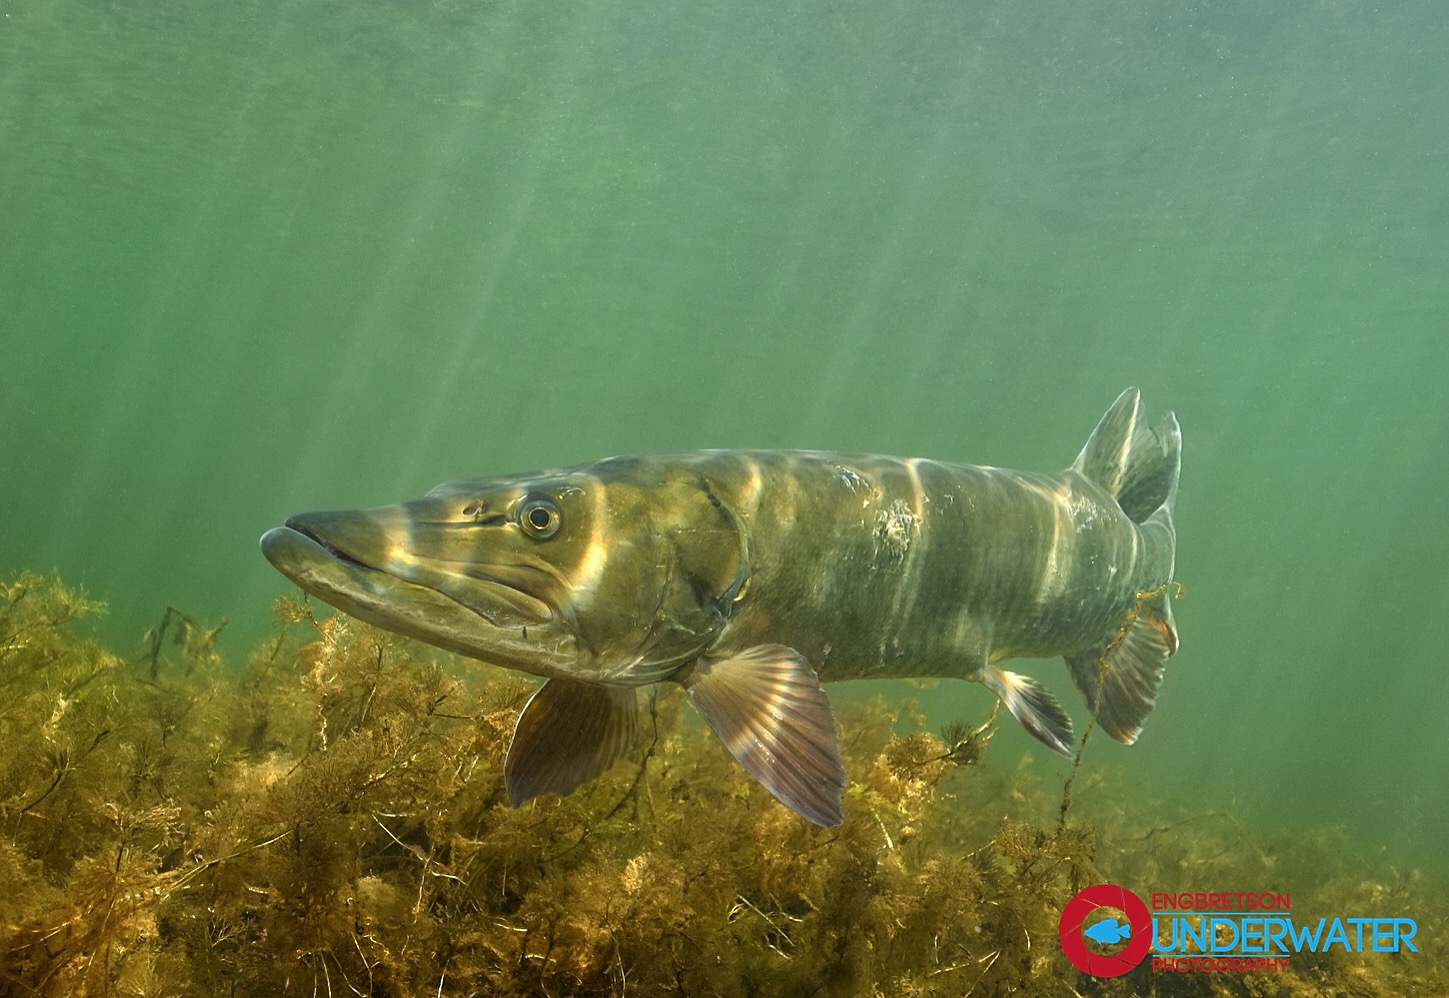 Engbretson Underwater Photography: Swimming With Muskies